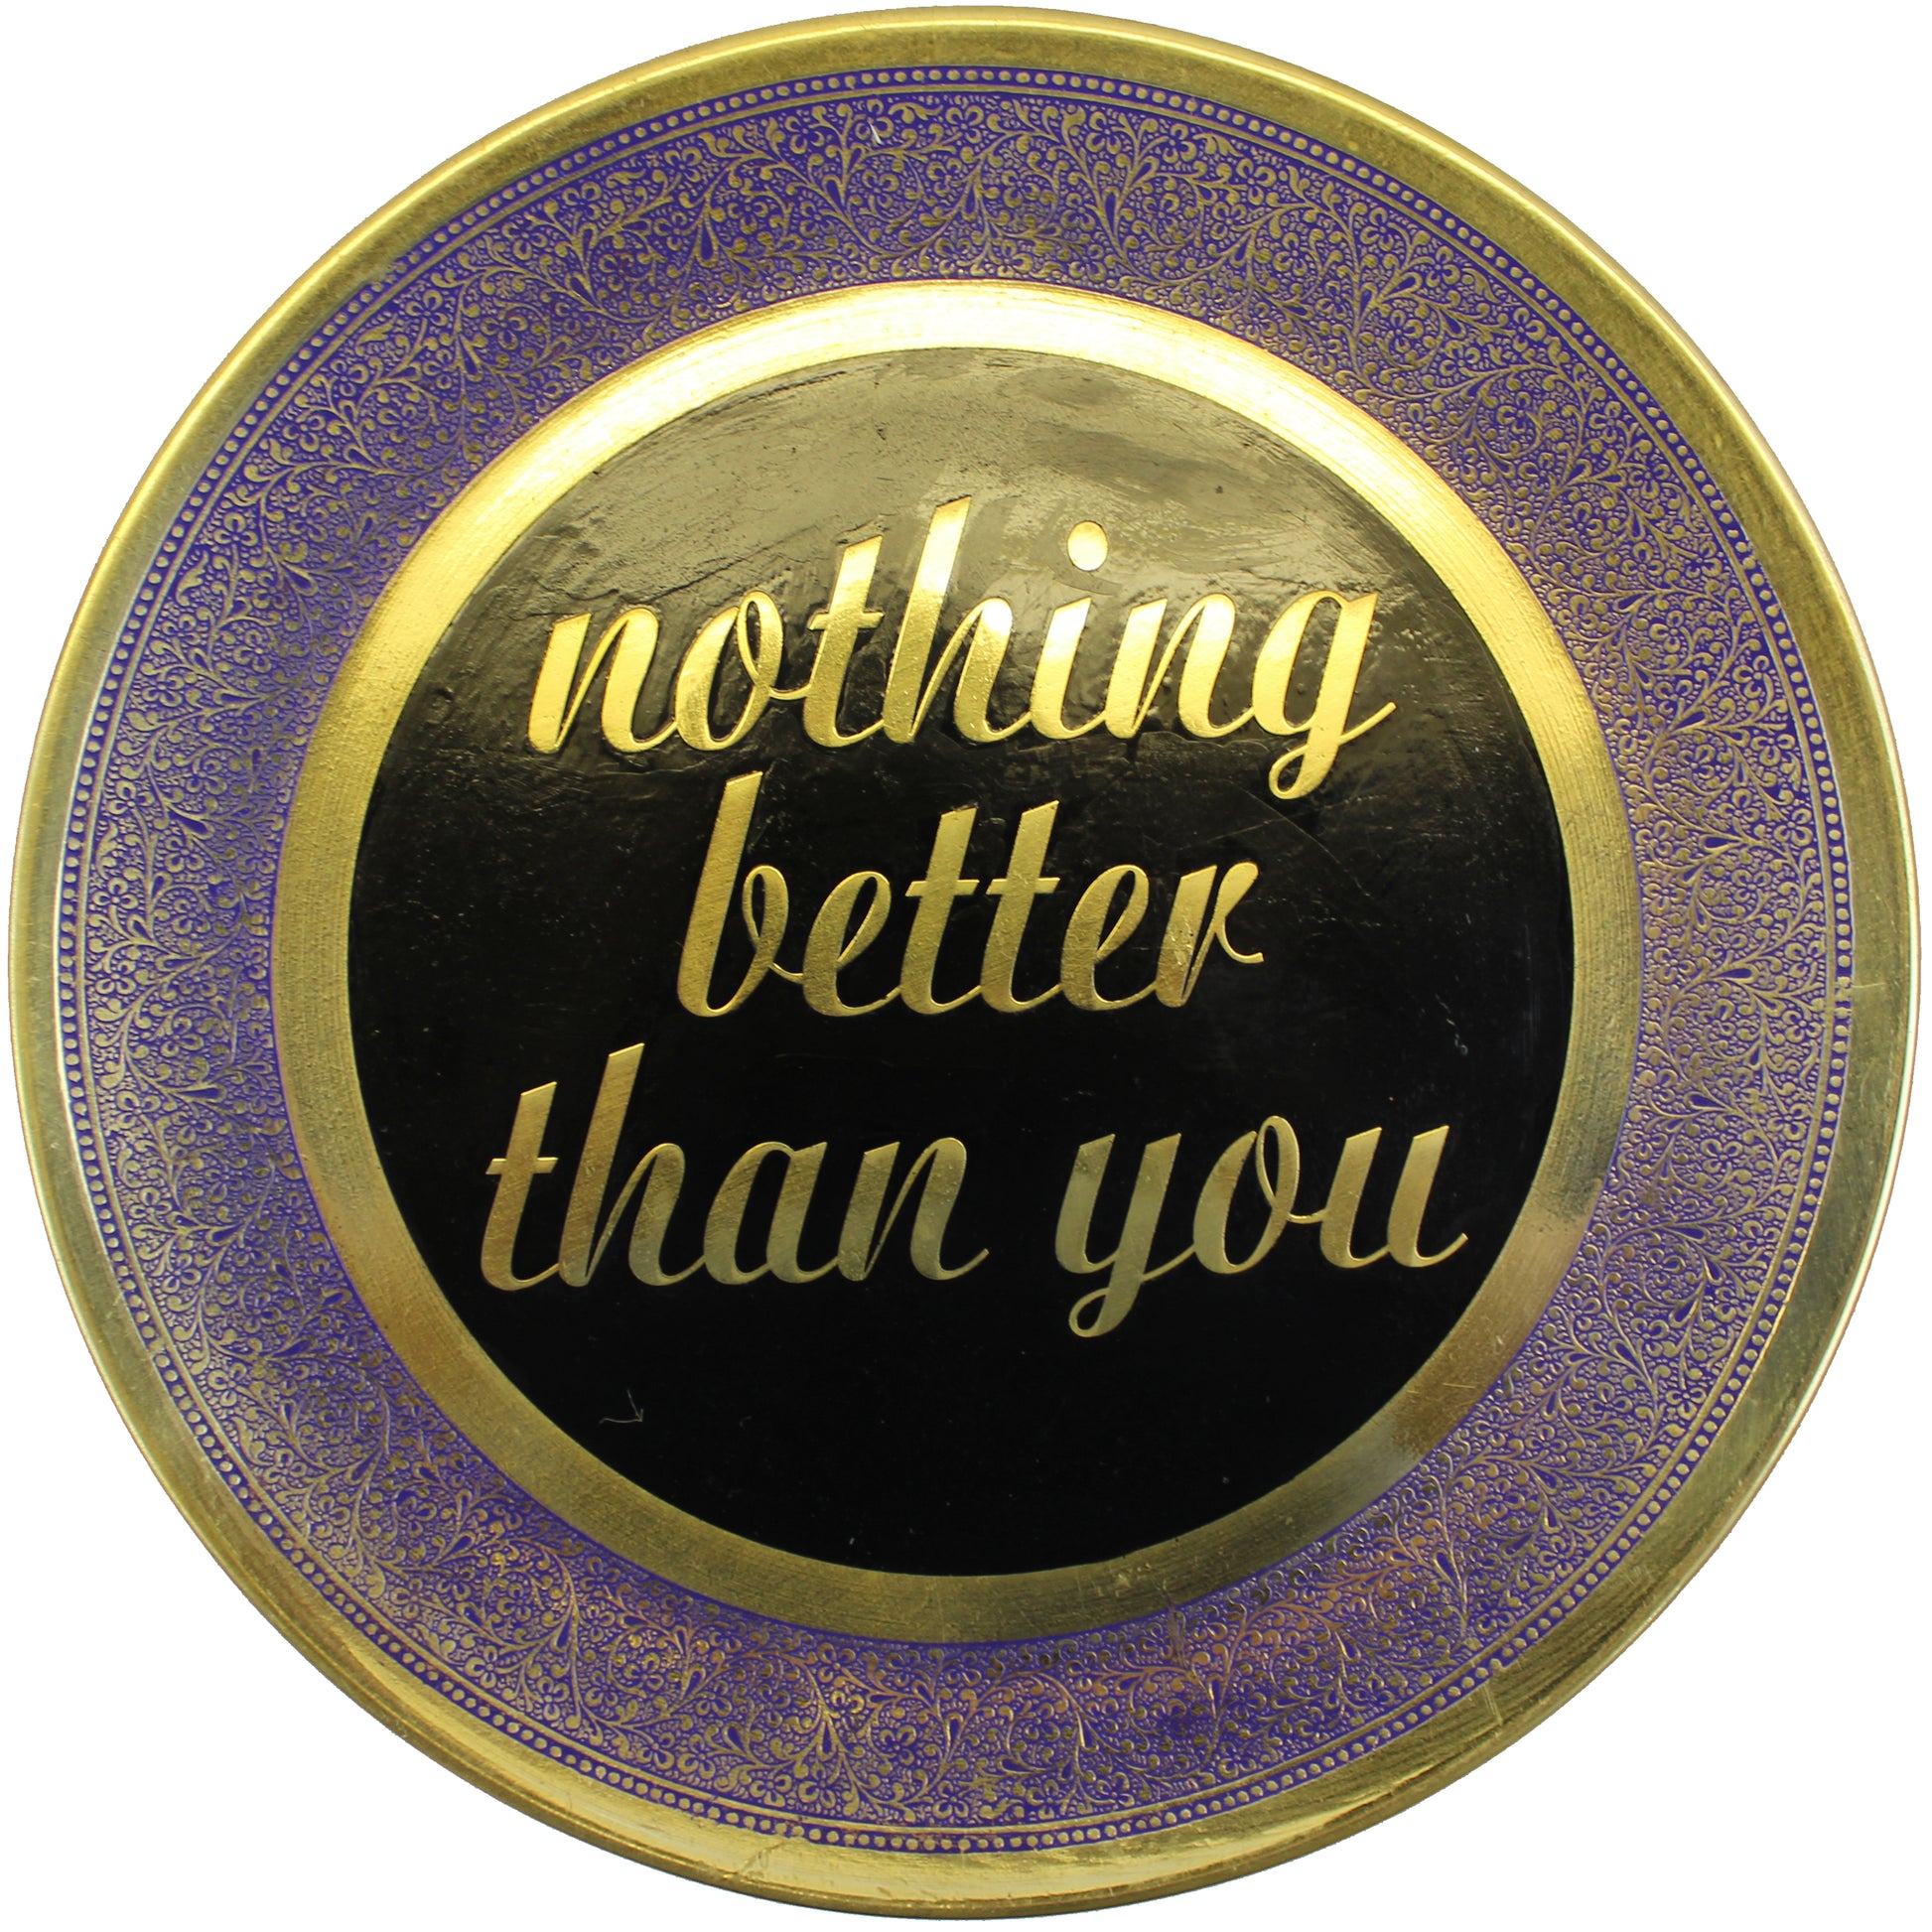 Natural Geo Nothing Better Than You Decorative Wall Hanging Brass Accent Plate